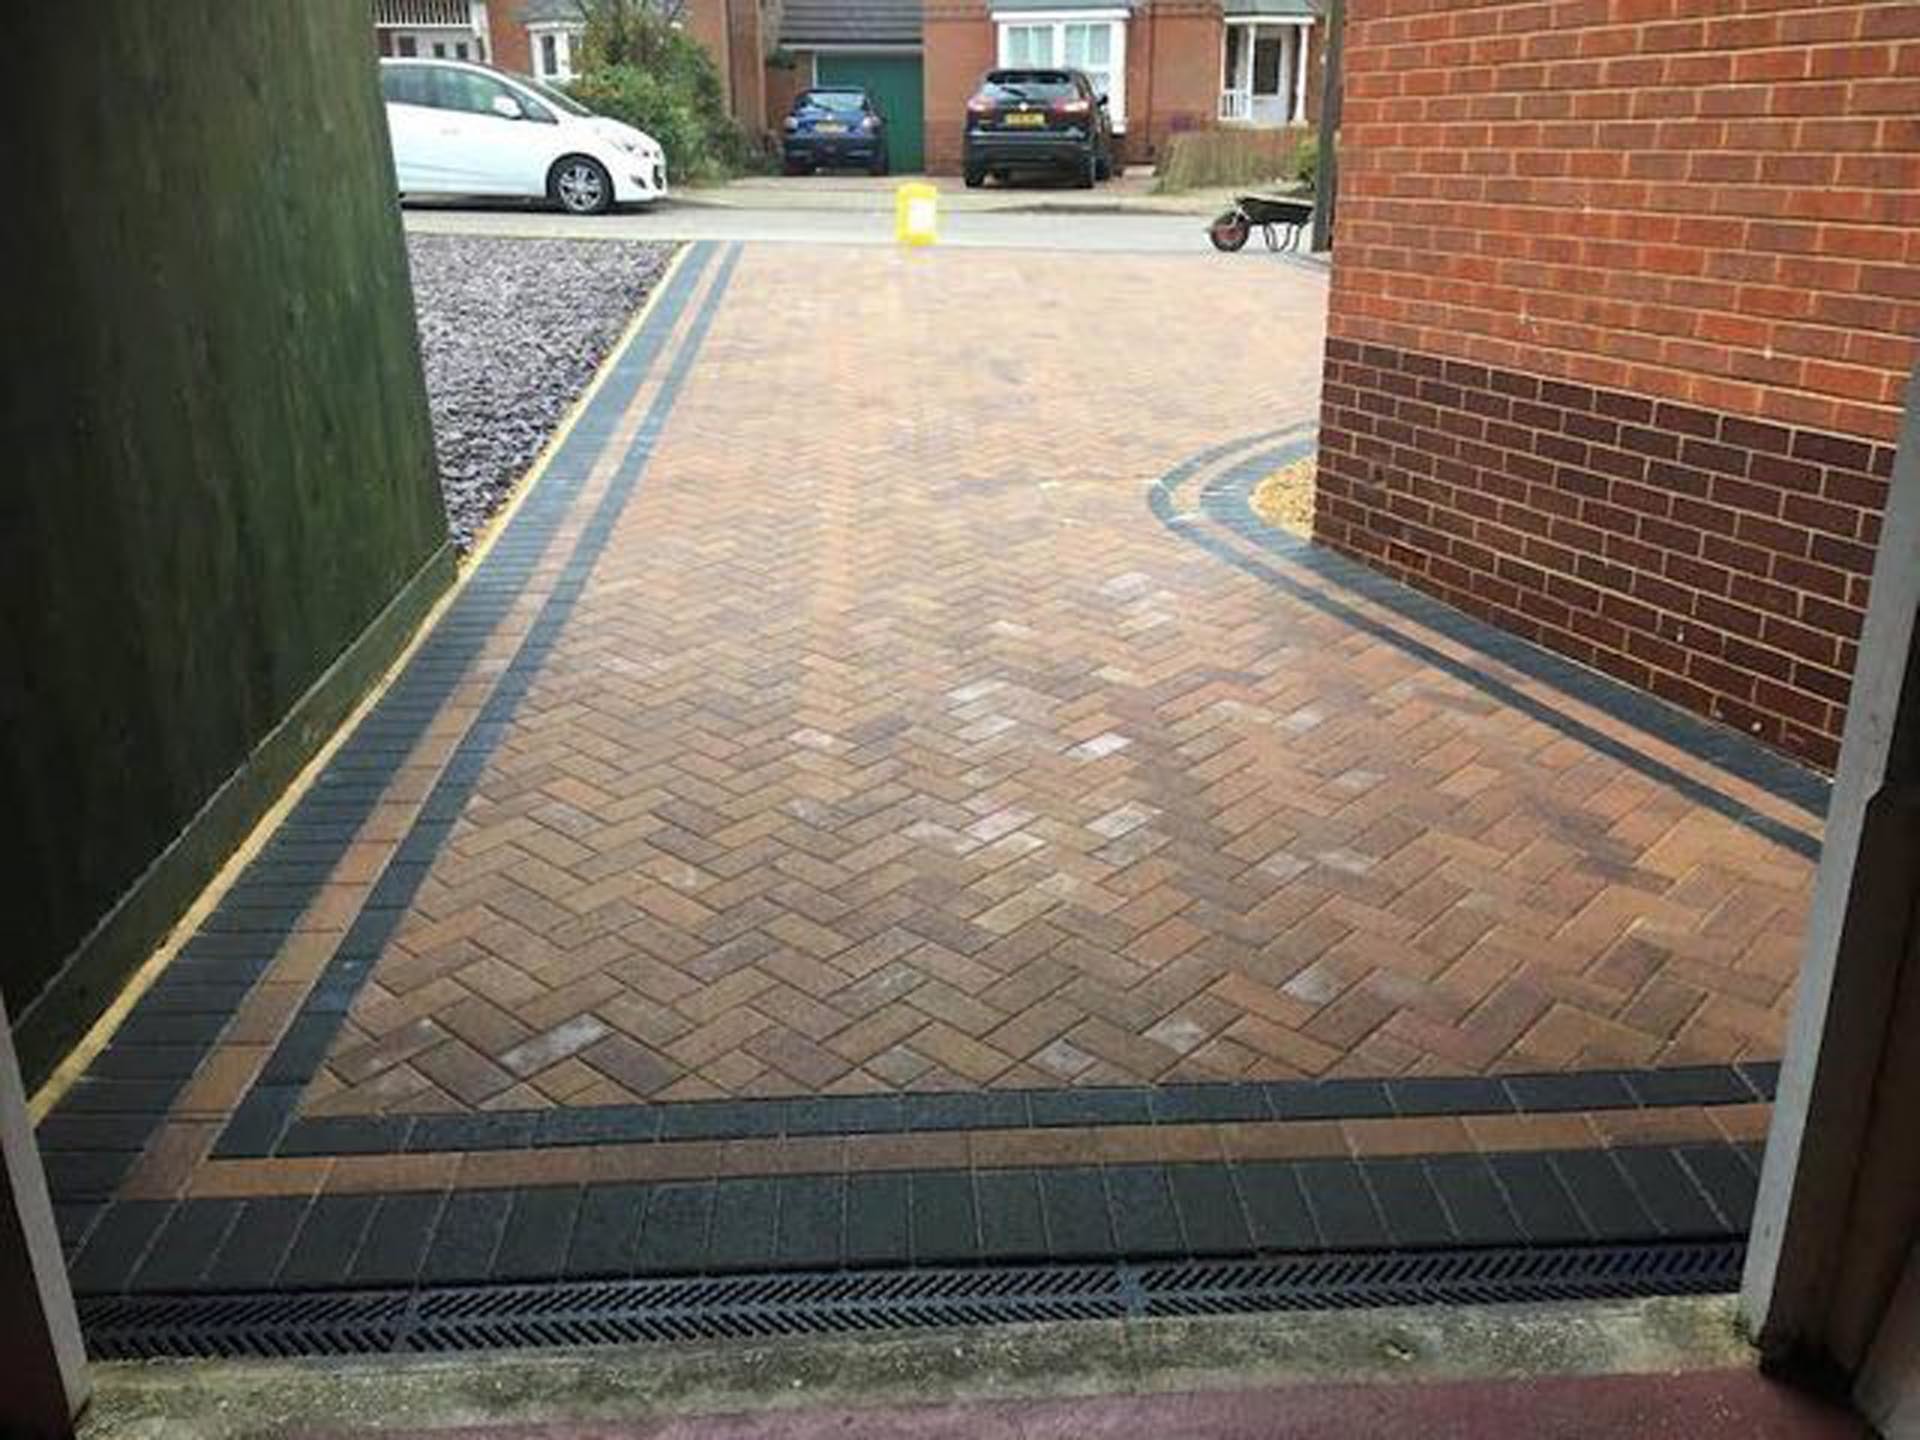 Cambs Paving - Block paving driveway specialists in Cambridgeshire